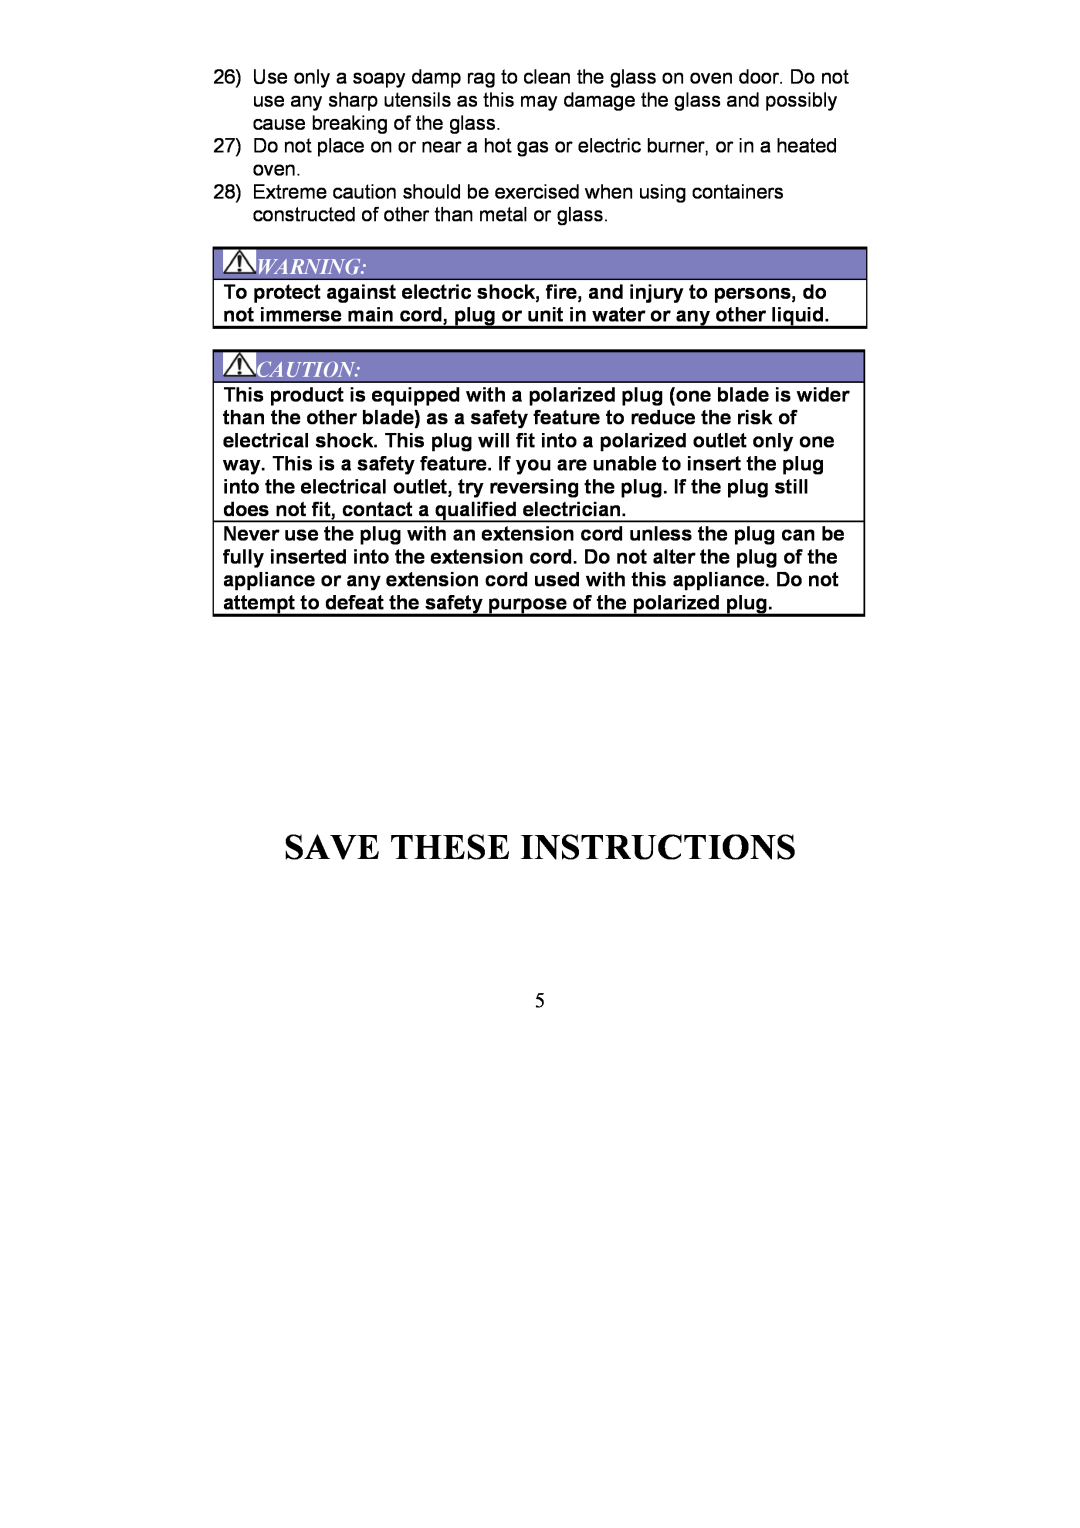 Magic Chef EWTO7S10 manual Save These Instructions 